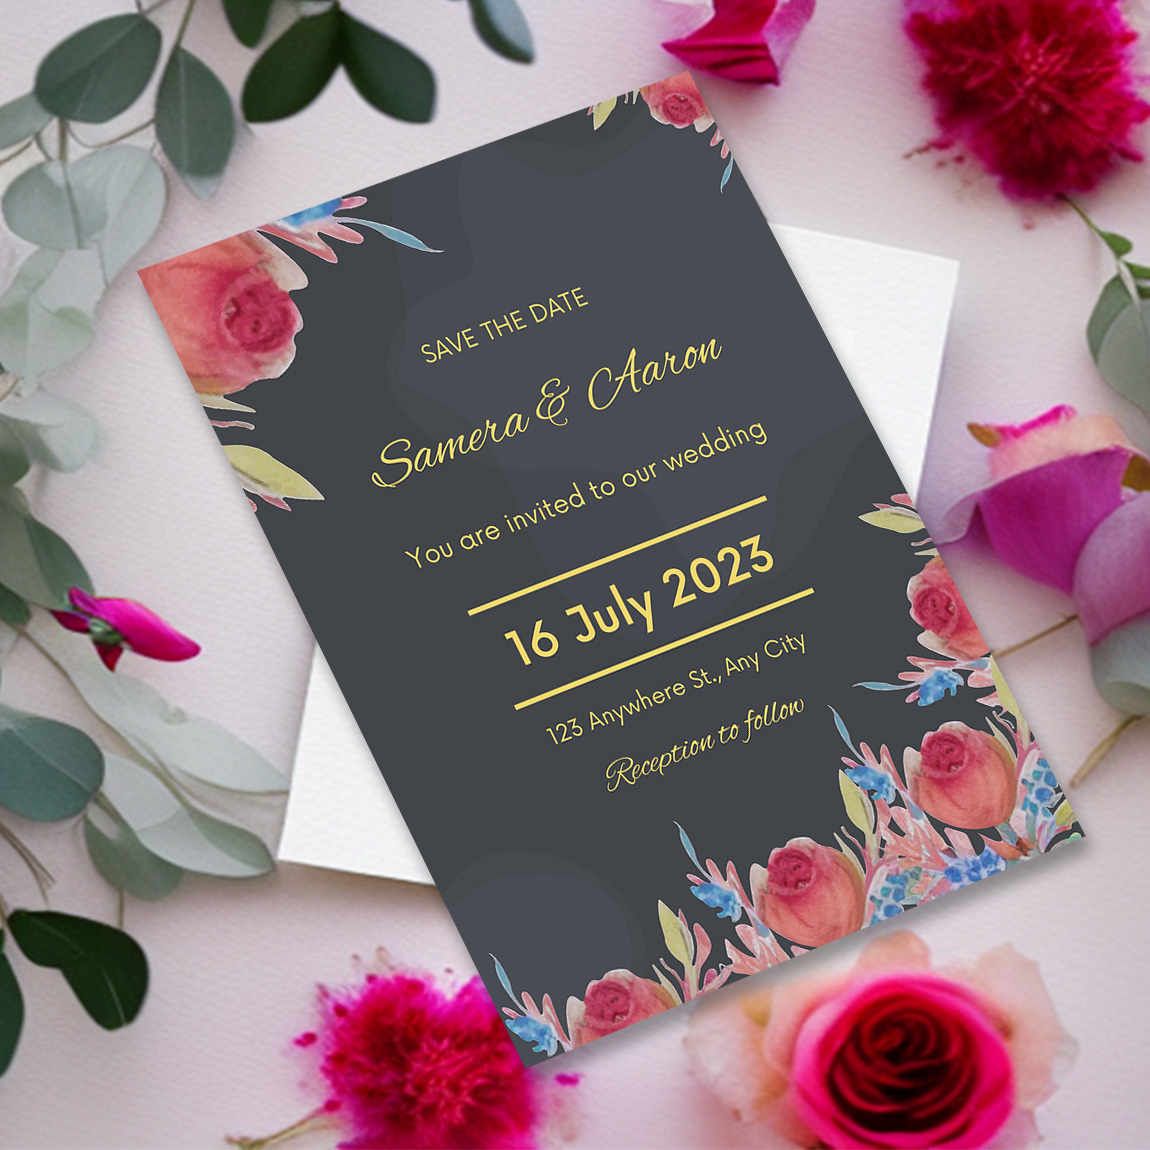 Image with wonderful wedding invitation card with flowers.